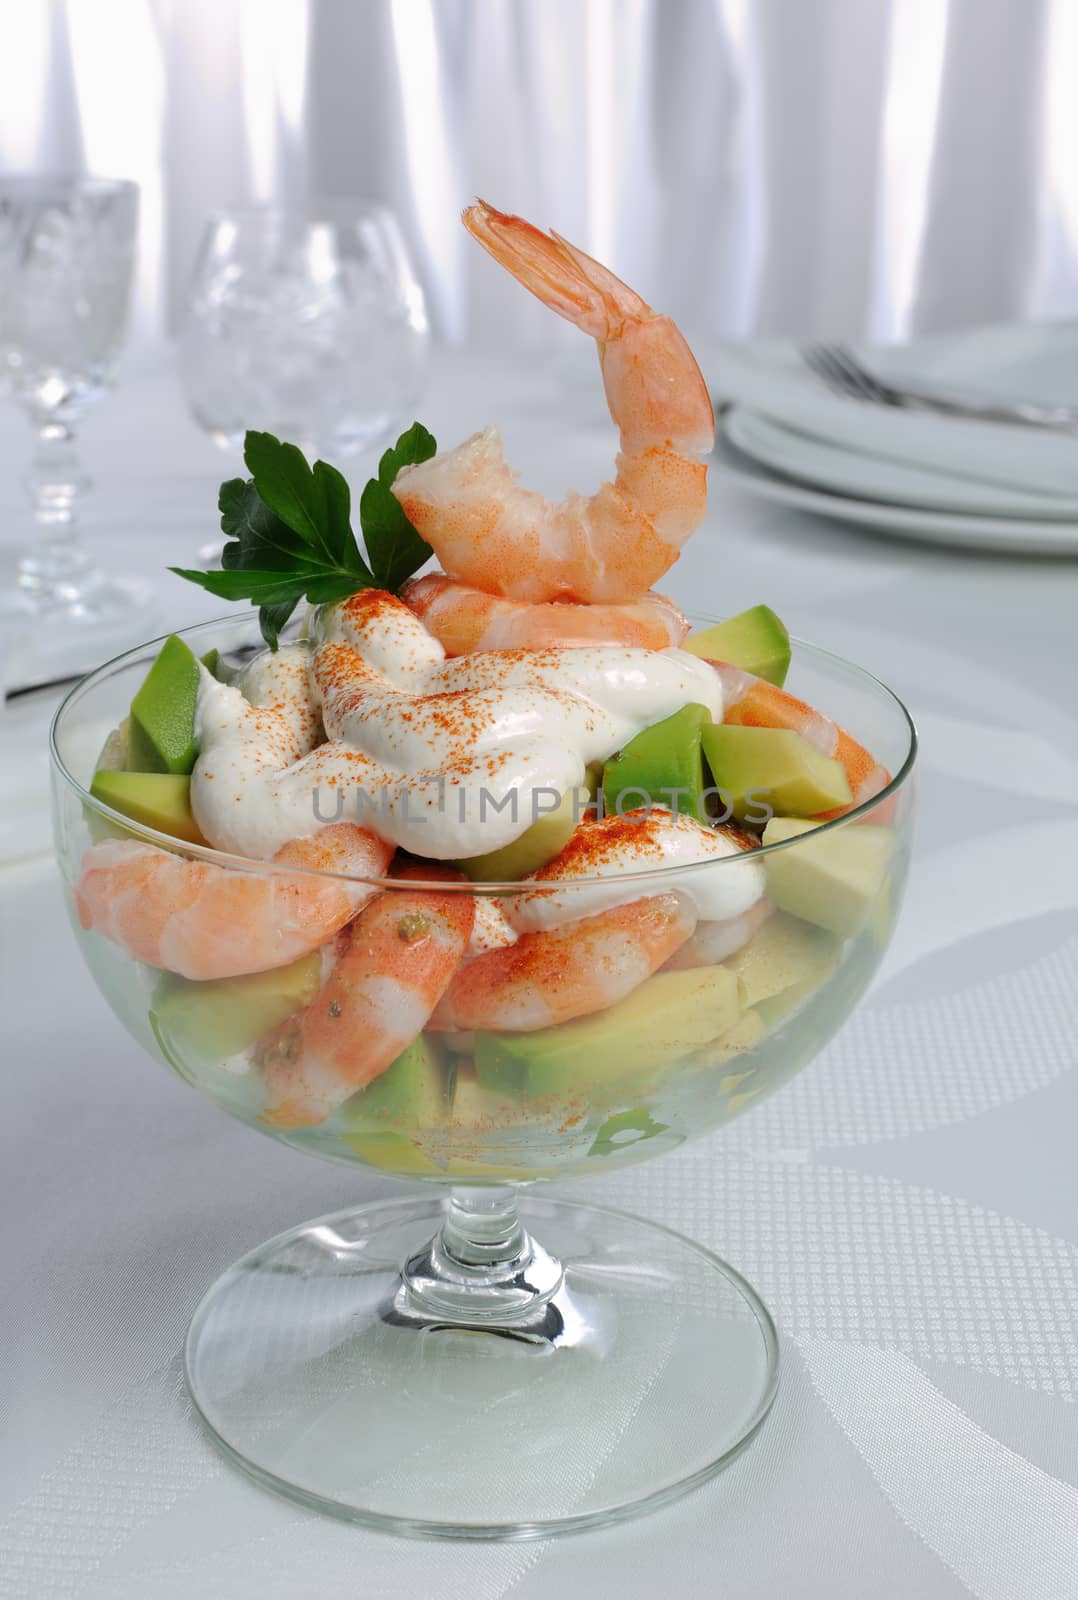 Shrimp with avocado yogurt and red pepper in a glass